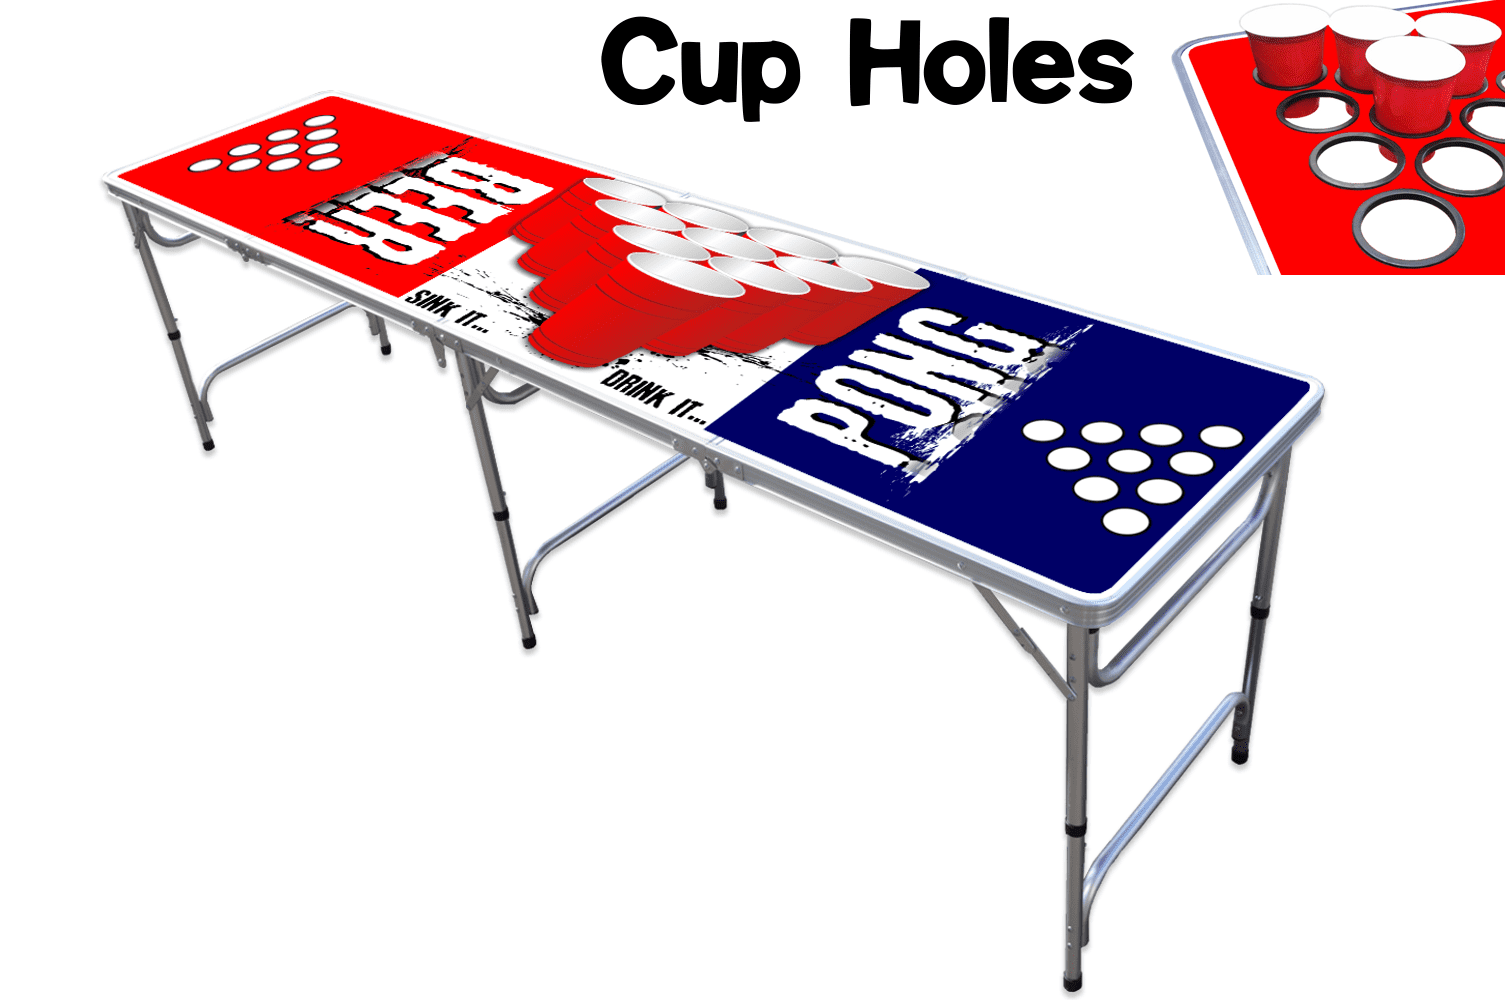 8-Foot Professional Beer Pong Table w/ Cup Holes - Bubbles Edition 